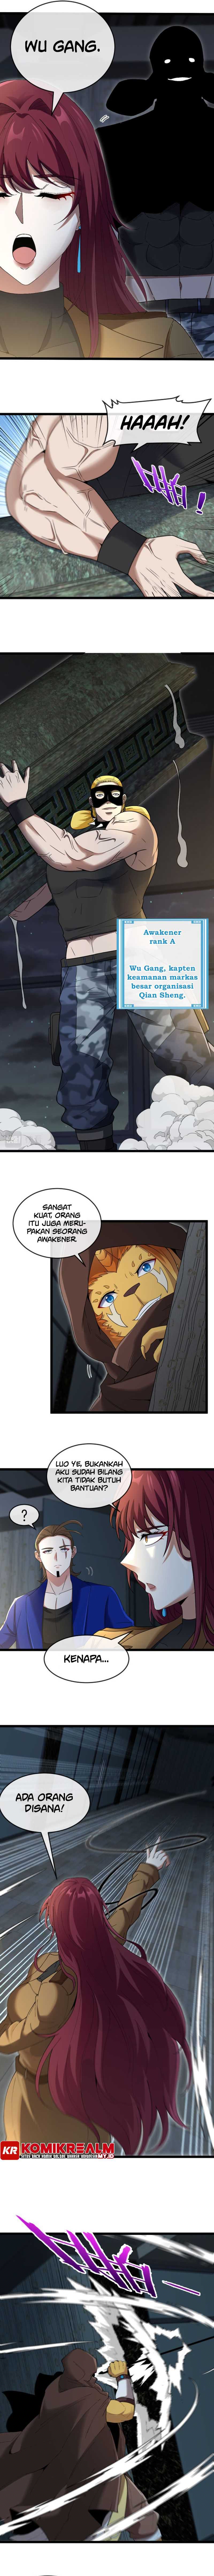 The Golden Lion King Chapter 07